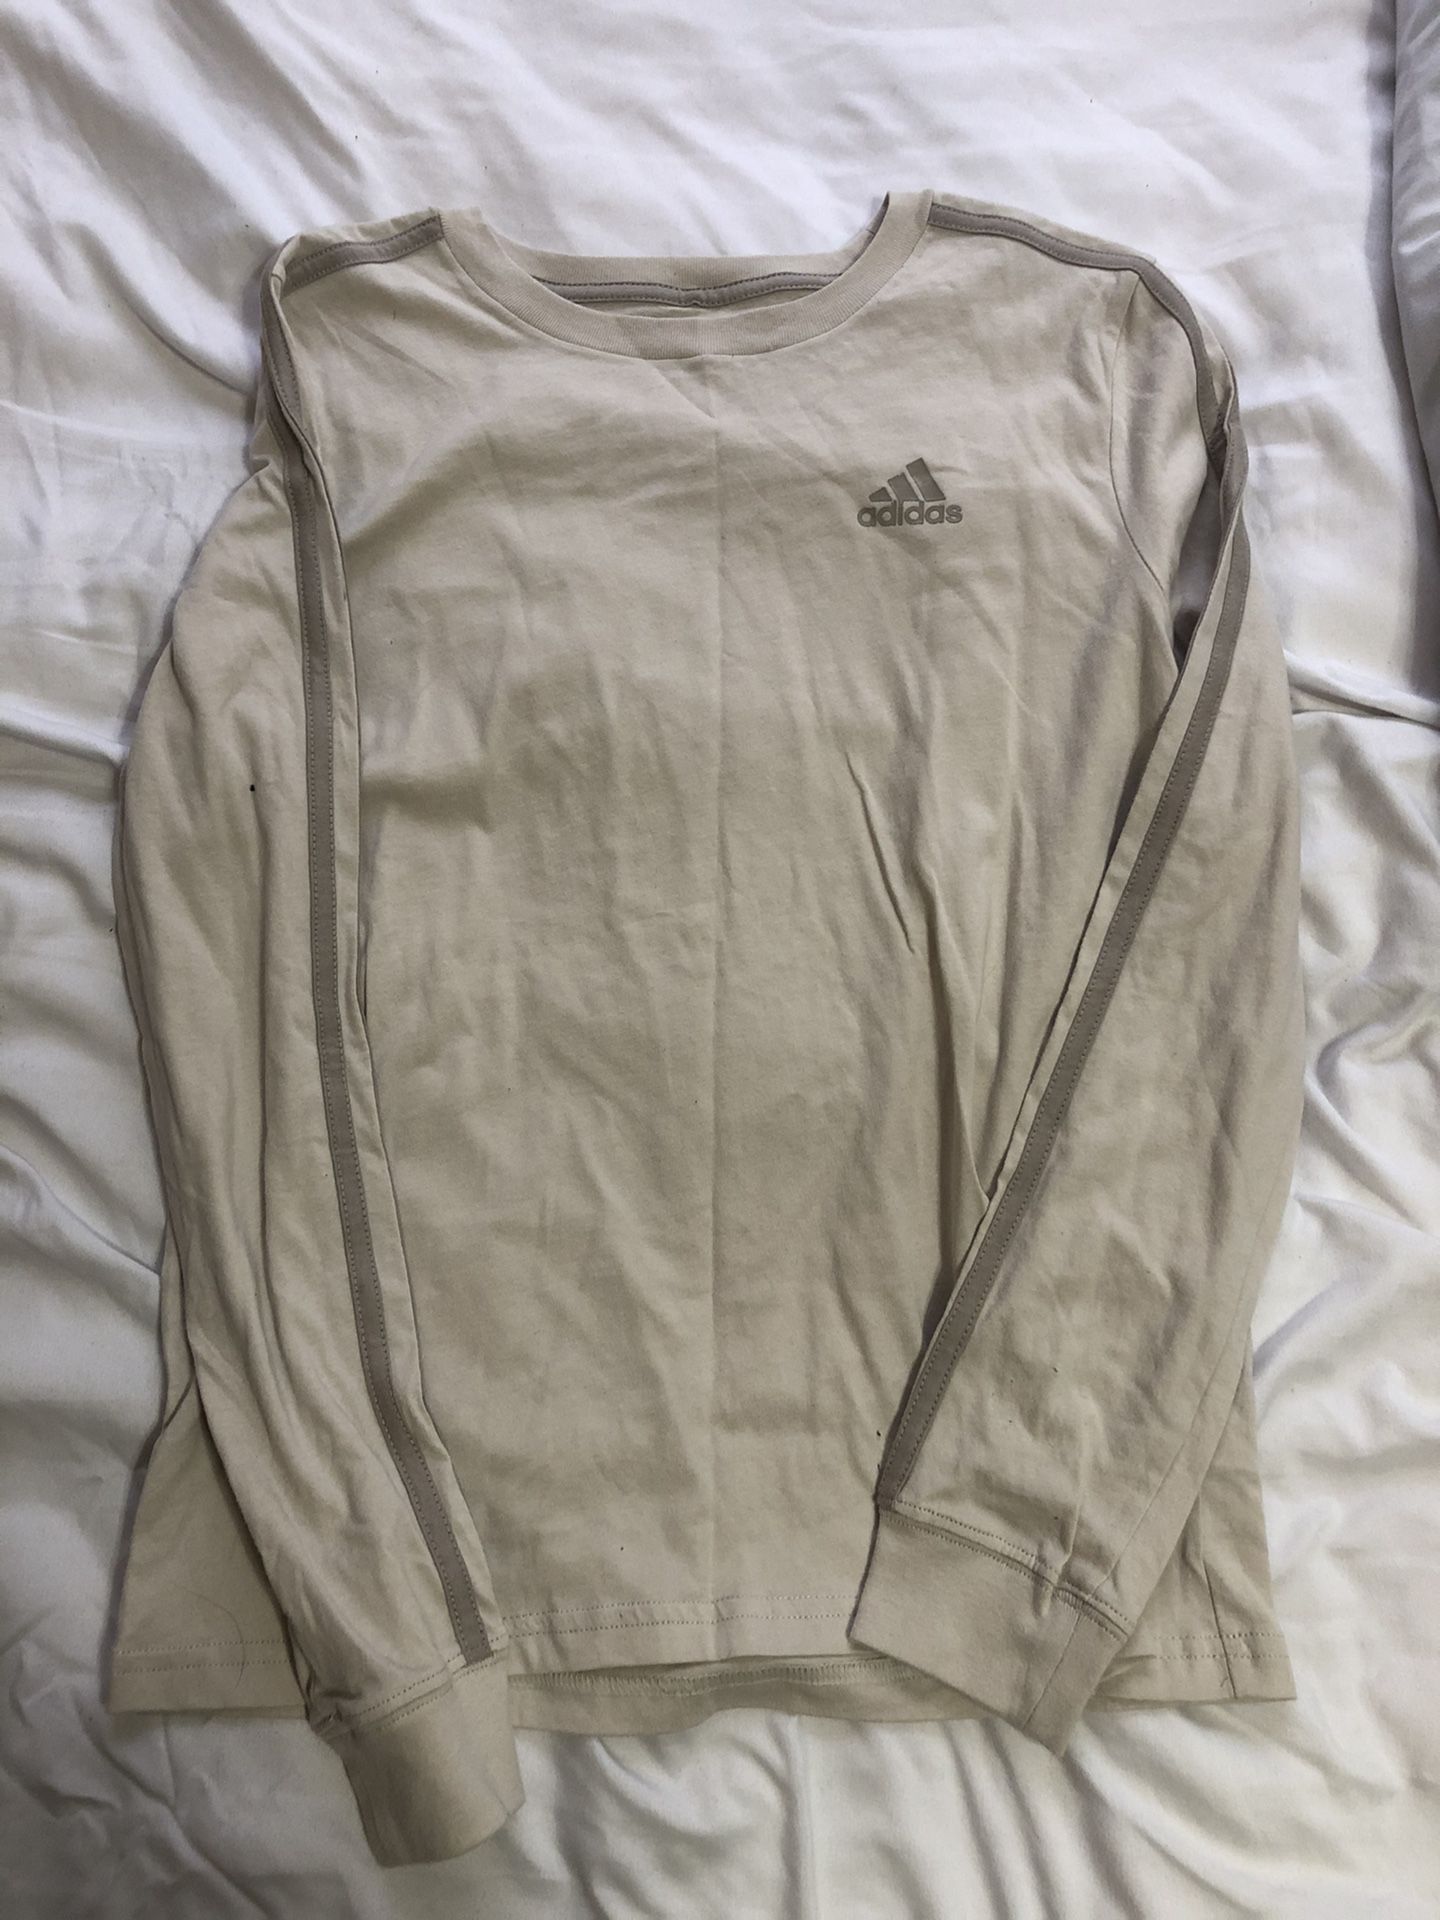 Bag of brand new and good condition kiddo clothes